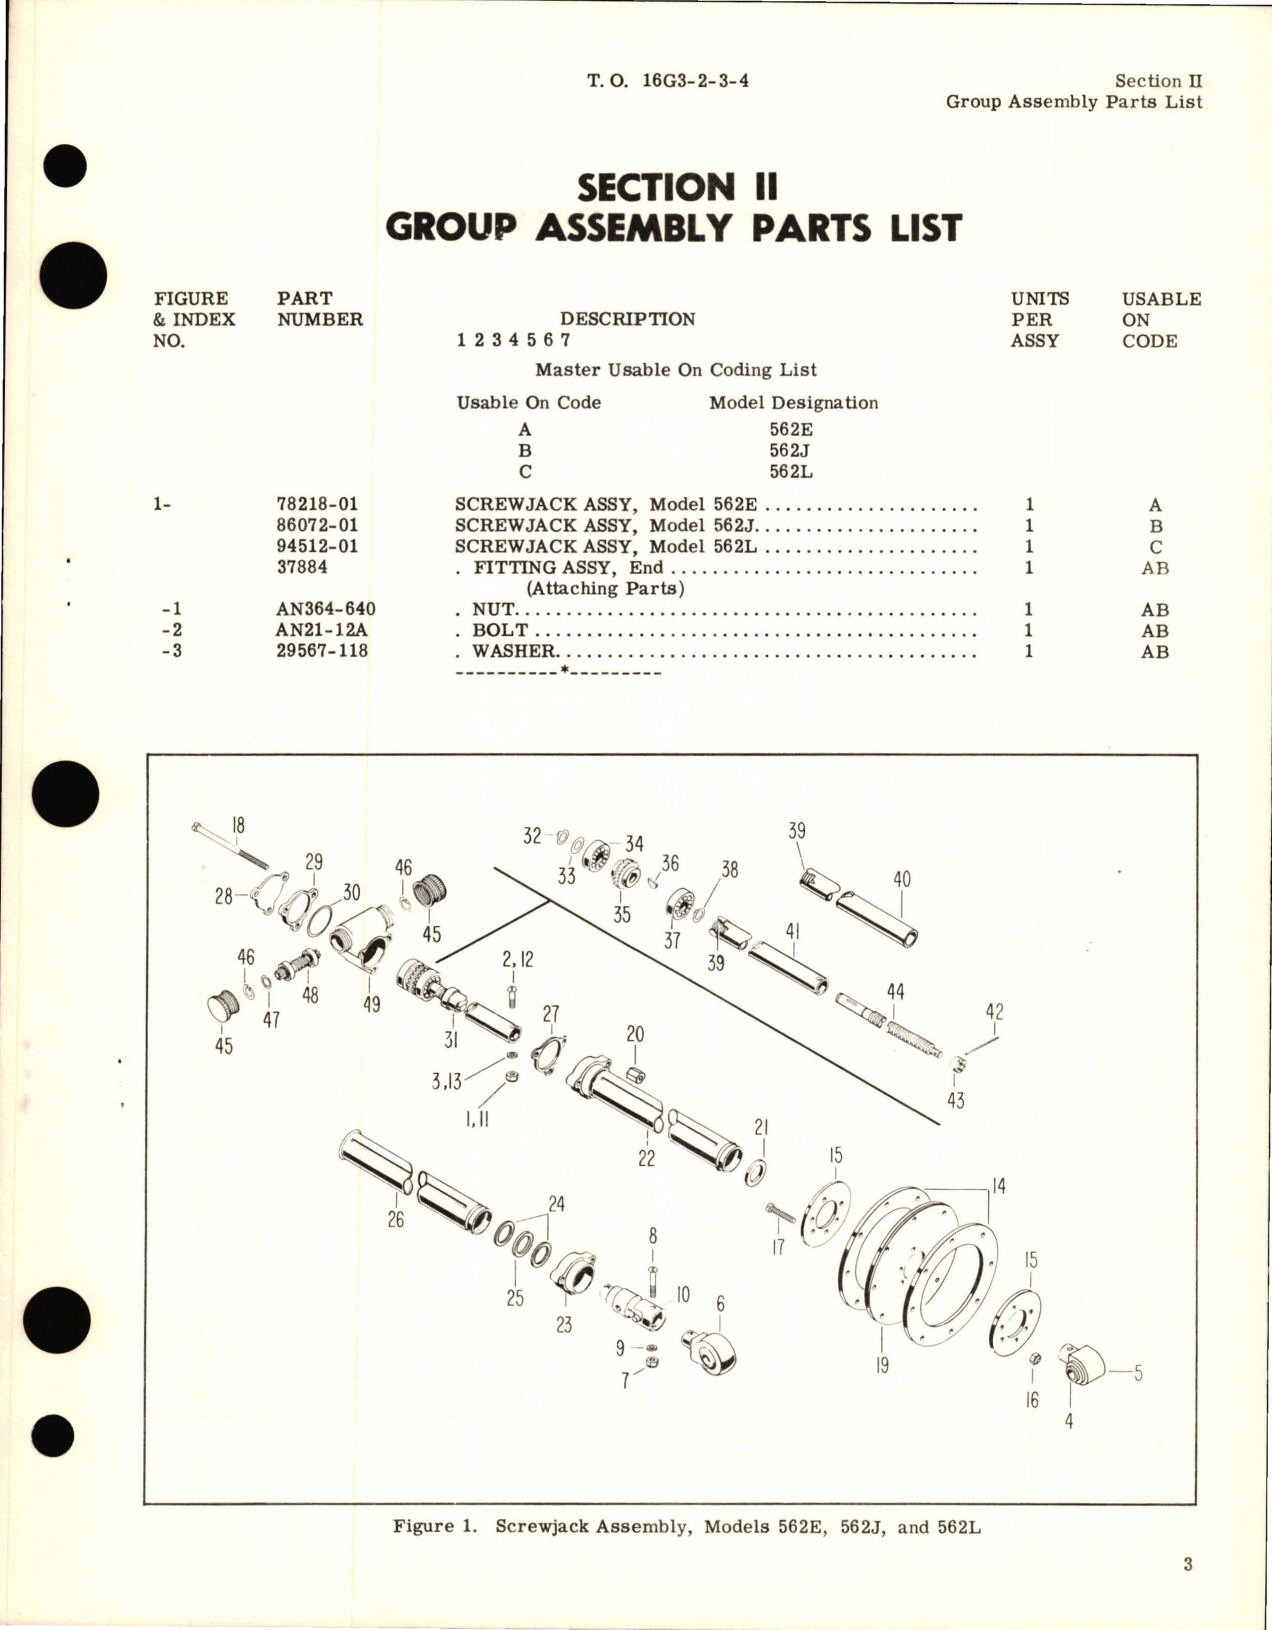 Sample page 5 from AirCorps Library document: Illustrated Parts Breakdown for Screwjack Assembly 562 Series